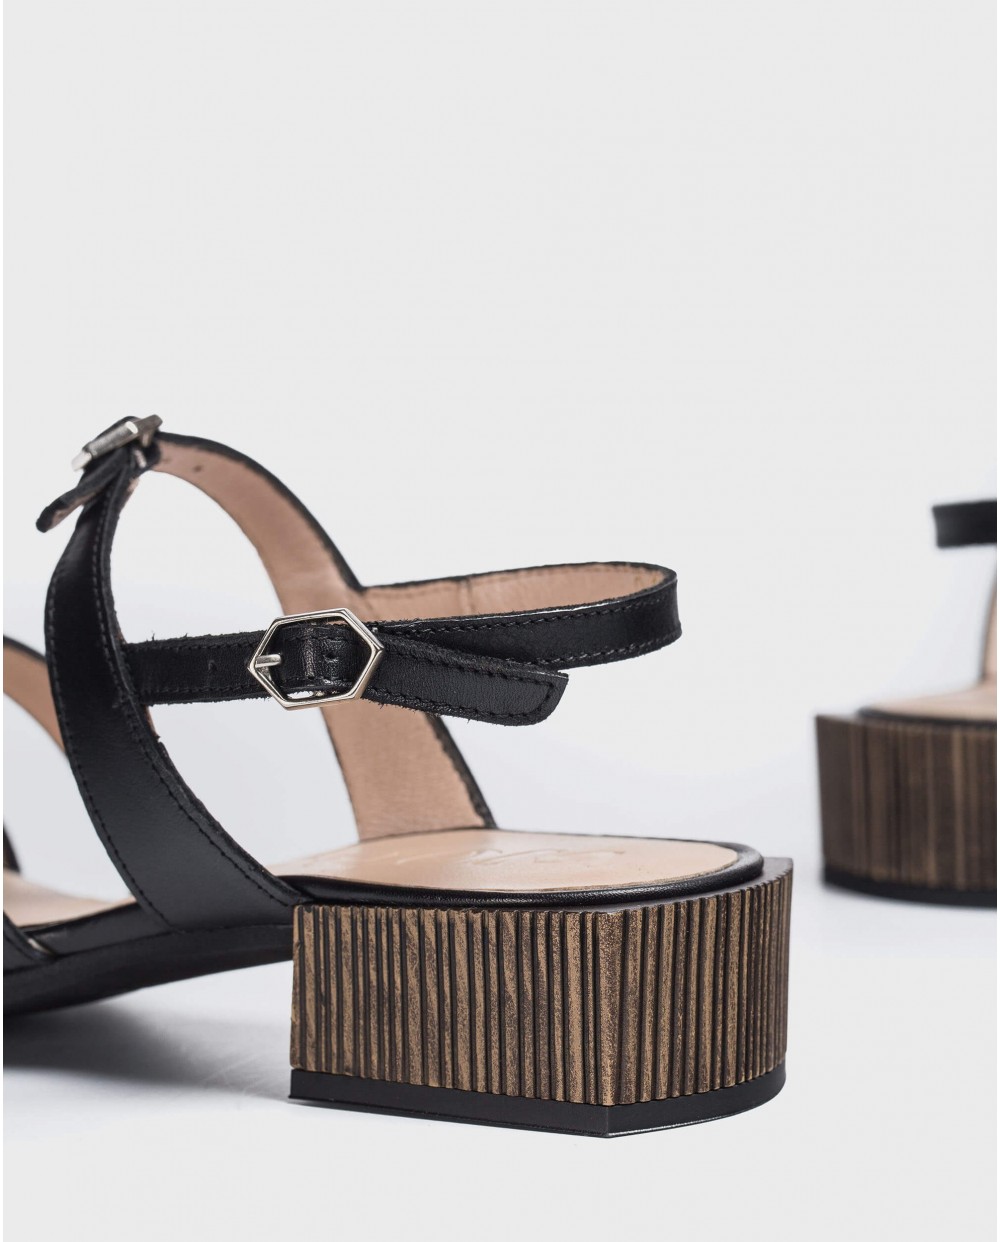 Wonders-Flat Shoes-High heeled sandal with buckles